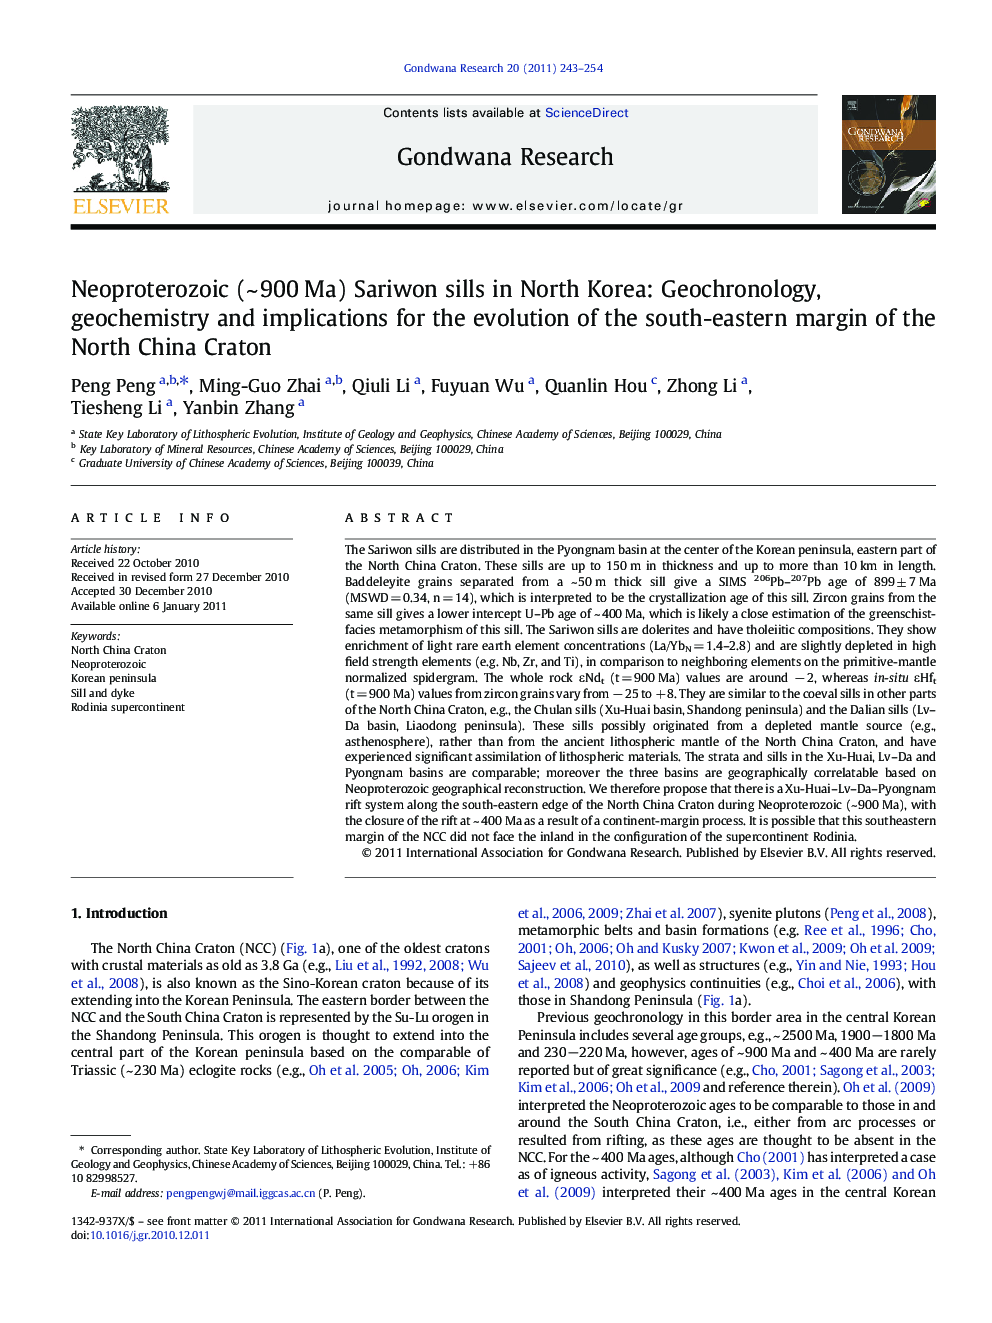 Neoproterozoic (~ 900 Ma) Sariwon sills in North Korea: Geochronology, geochemistry and implications for the evolution of the south-eastern margin of the North China Craton